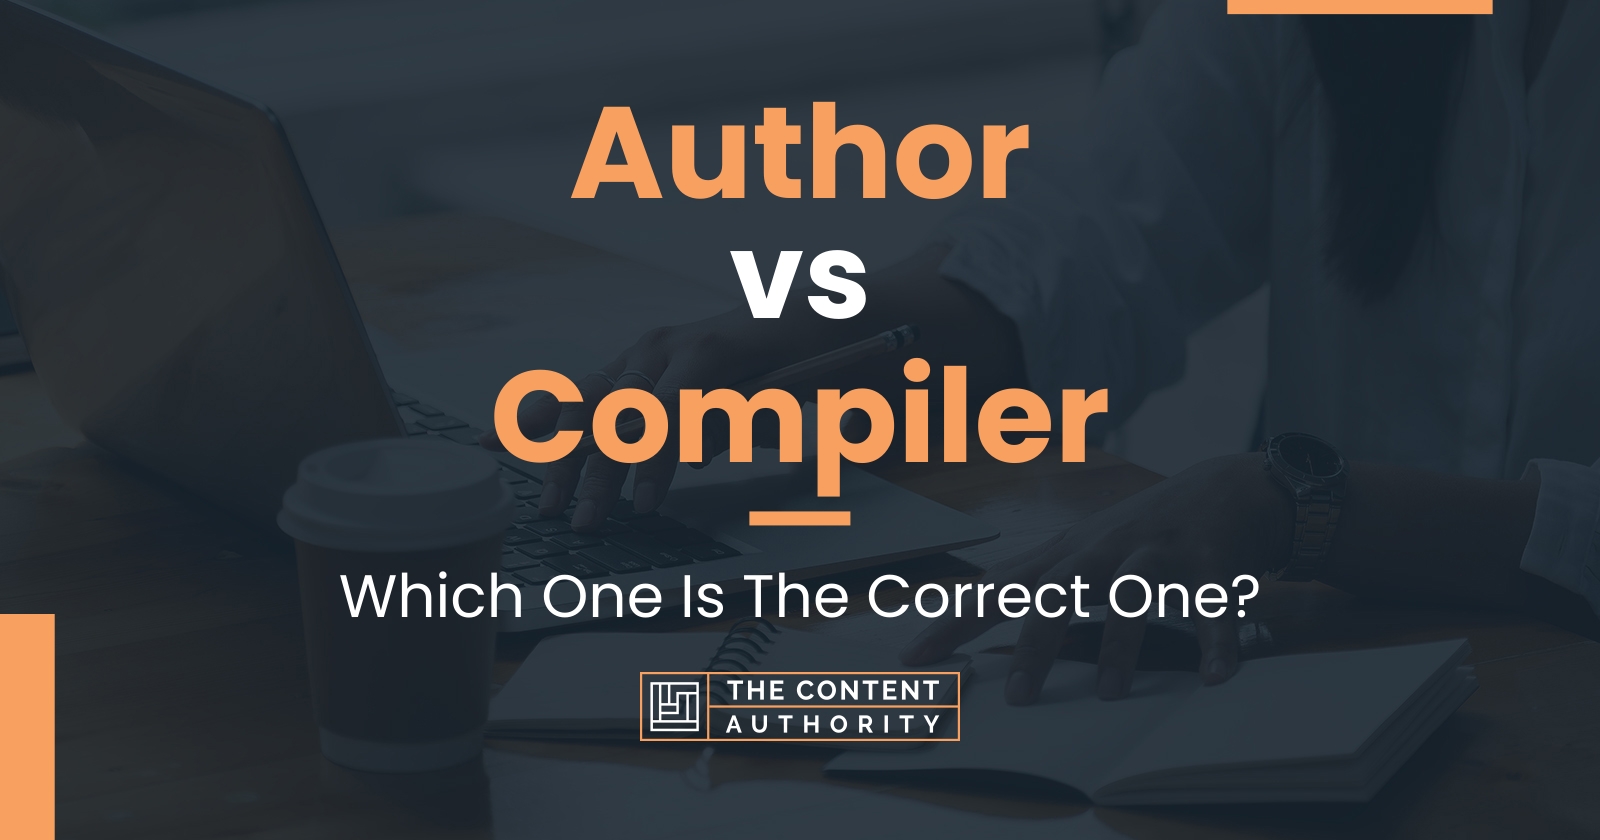 Author vs Compiler: Which One Is The Correct One?